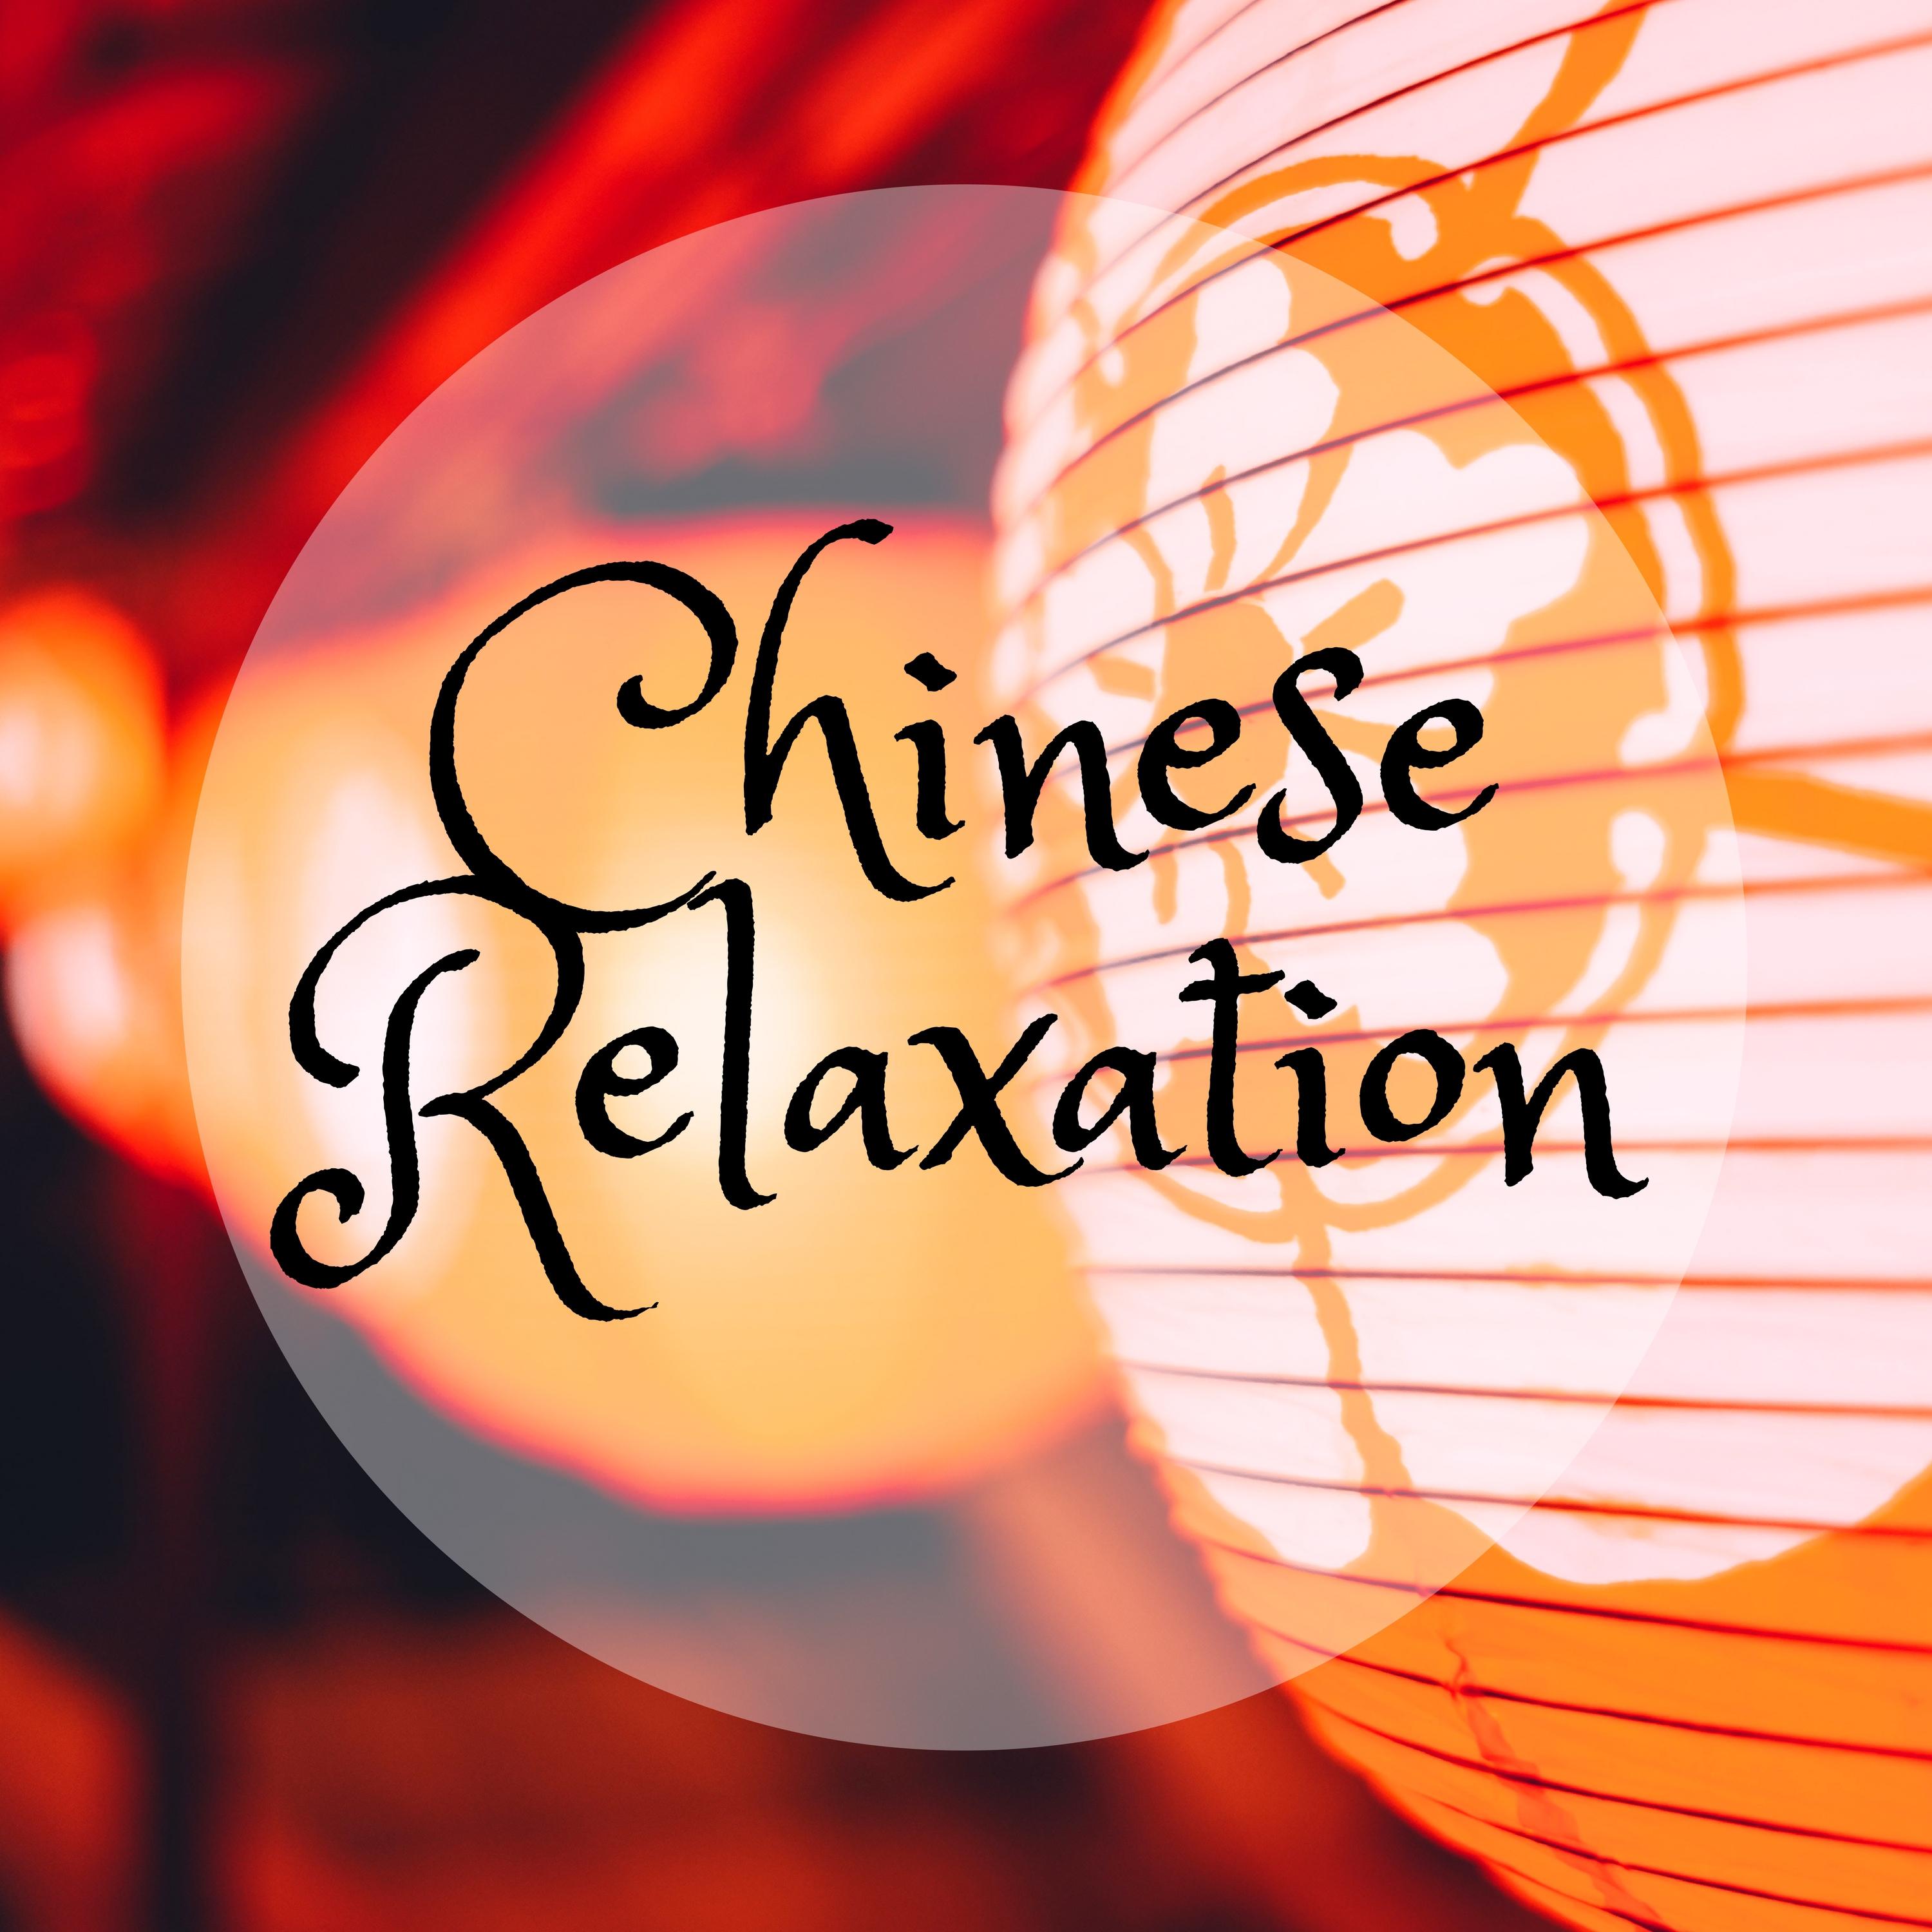 Chinese Relaxation